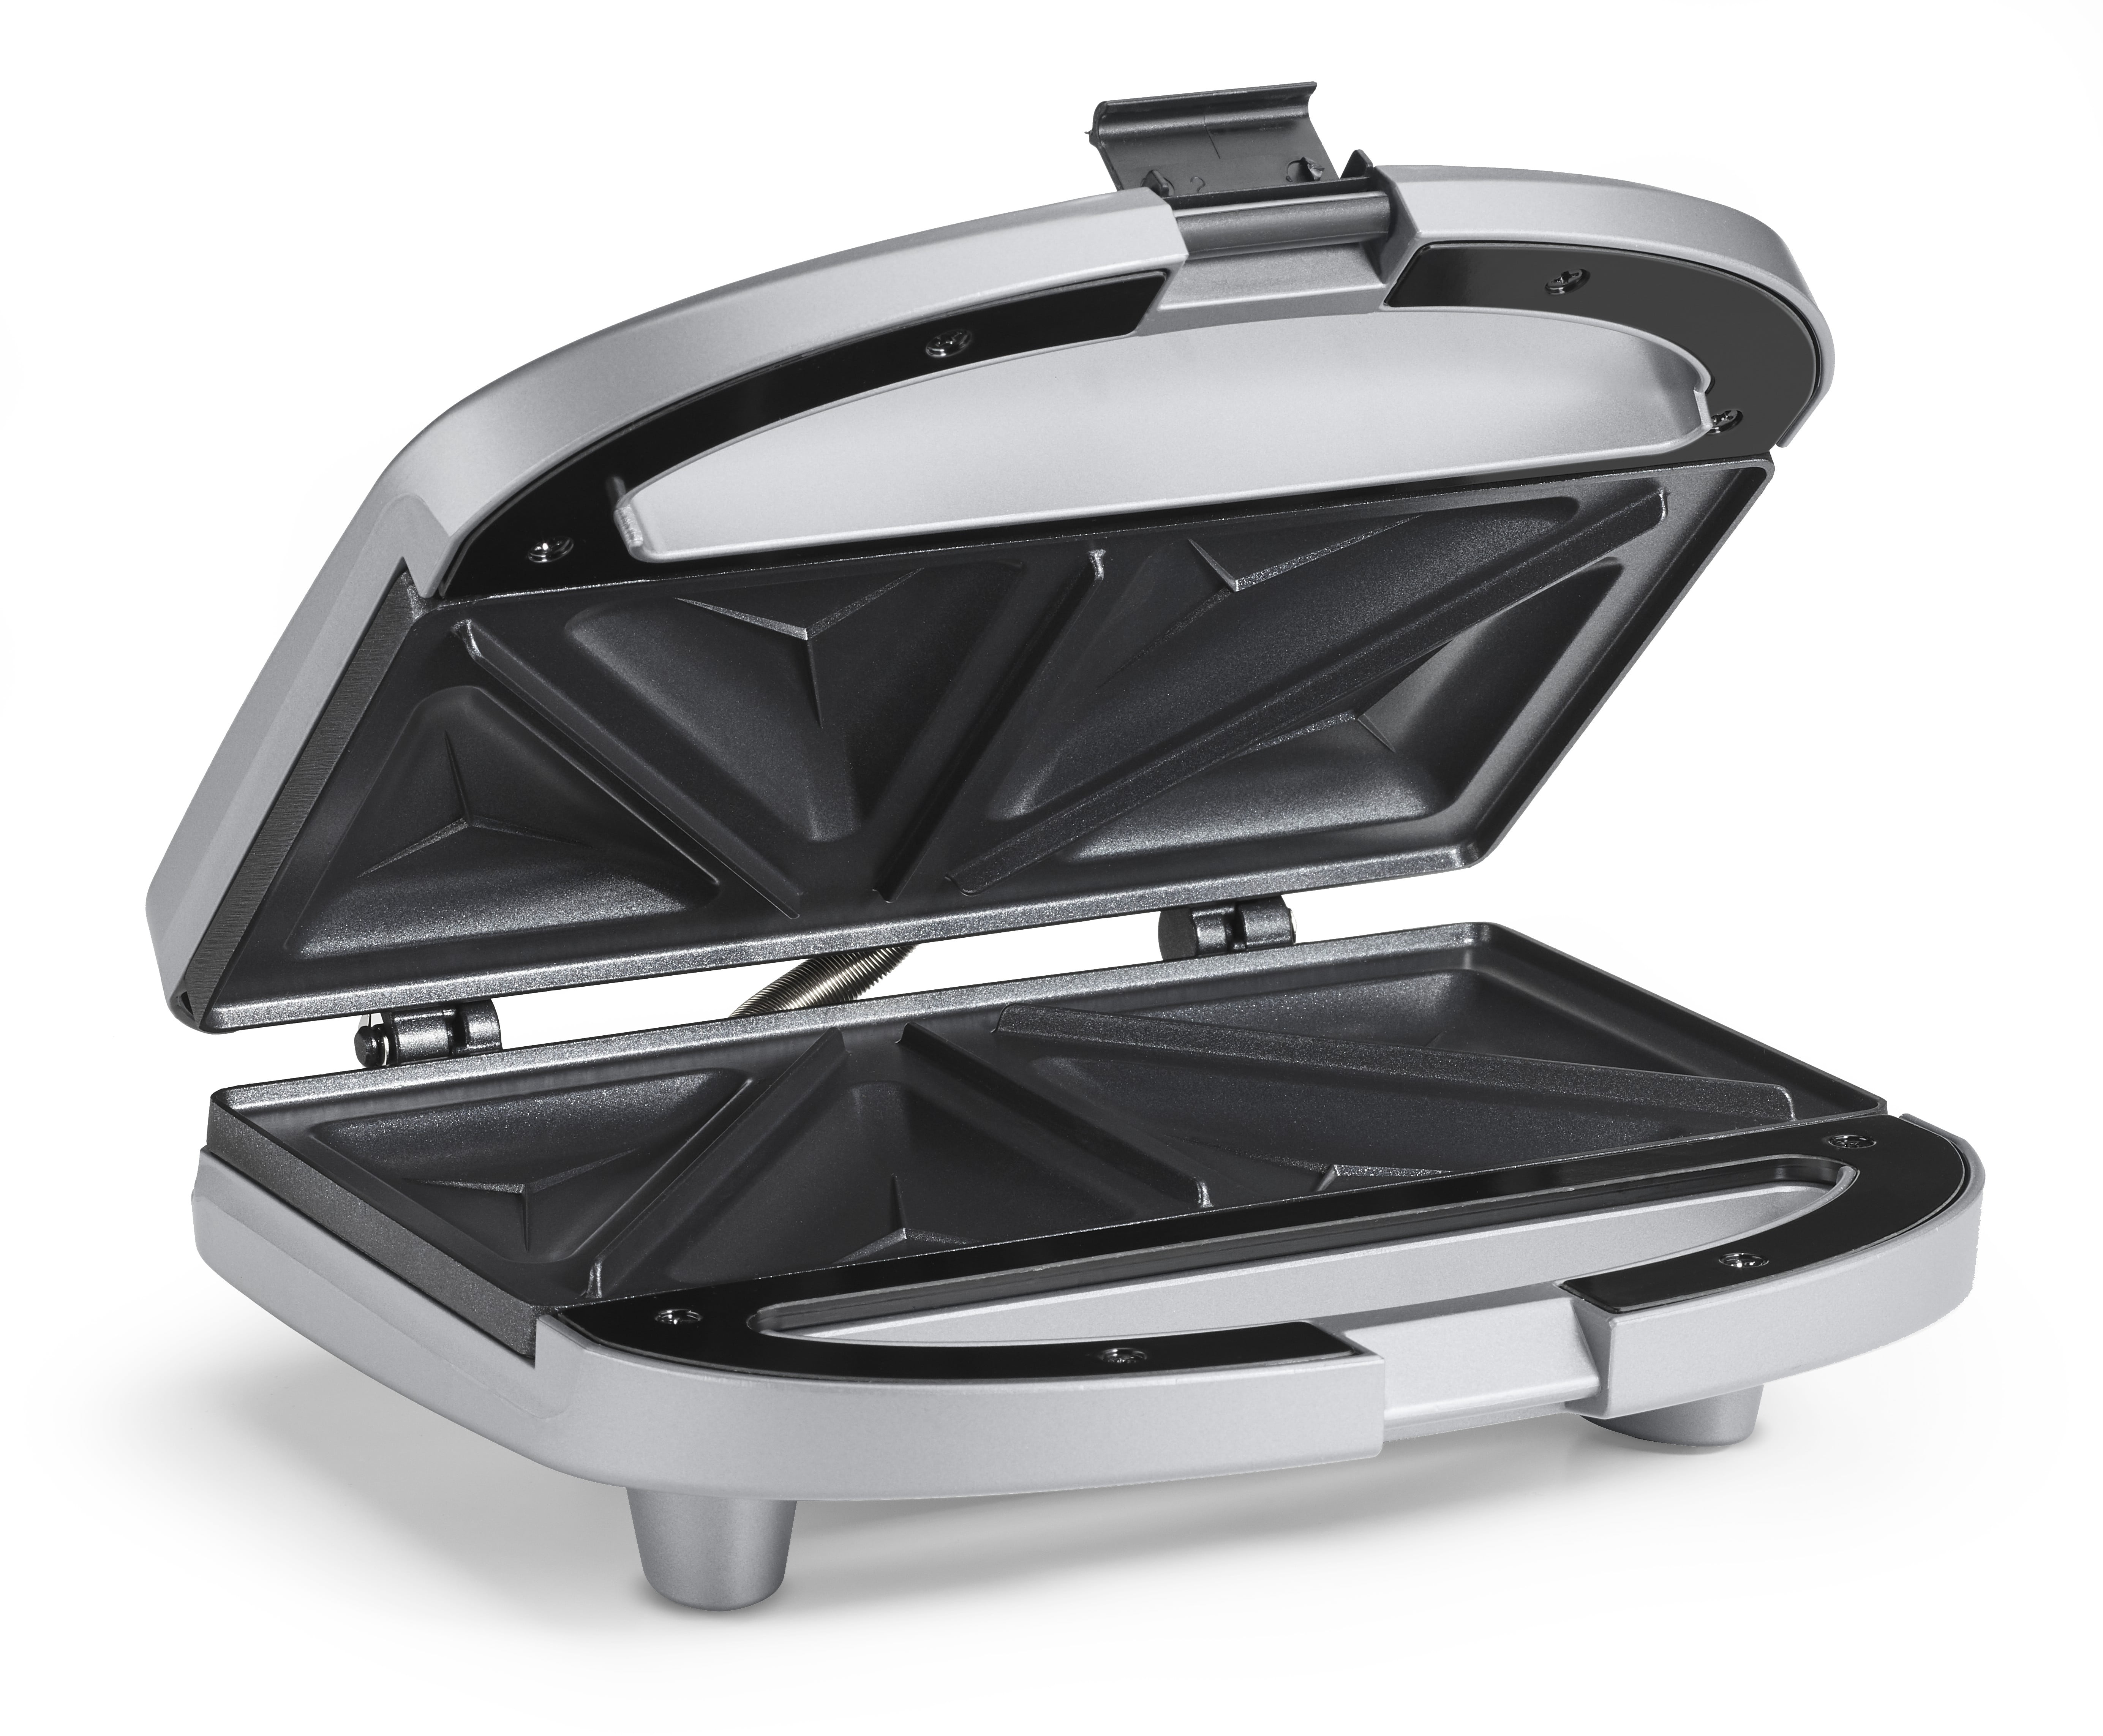 Cuisinart WM-SW2 Sandwich Grill Brushed chrome series￼ 2 At A Time￼ NEW  OPEN BOX